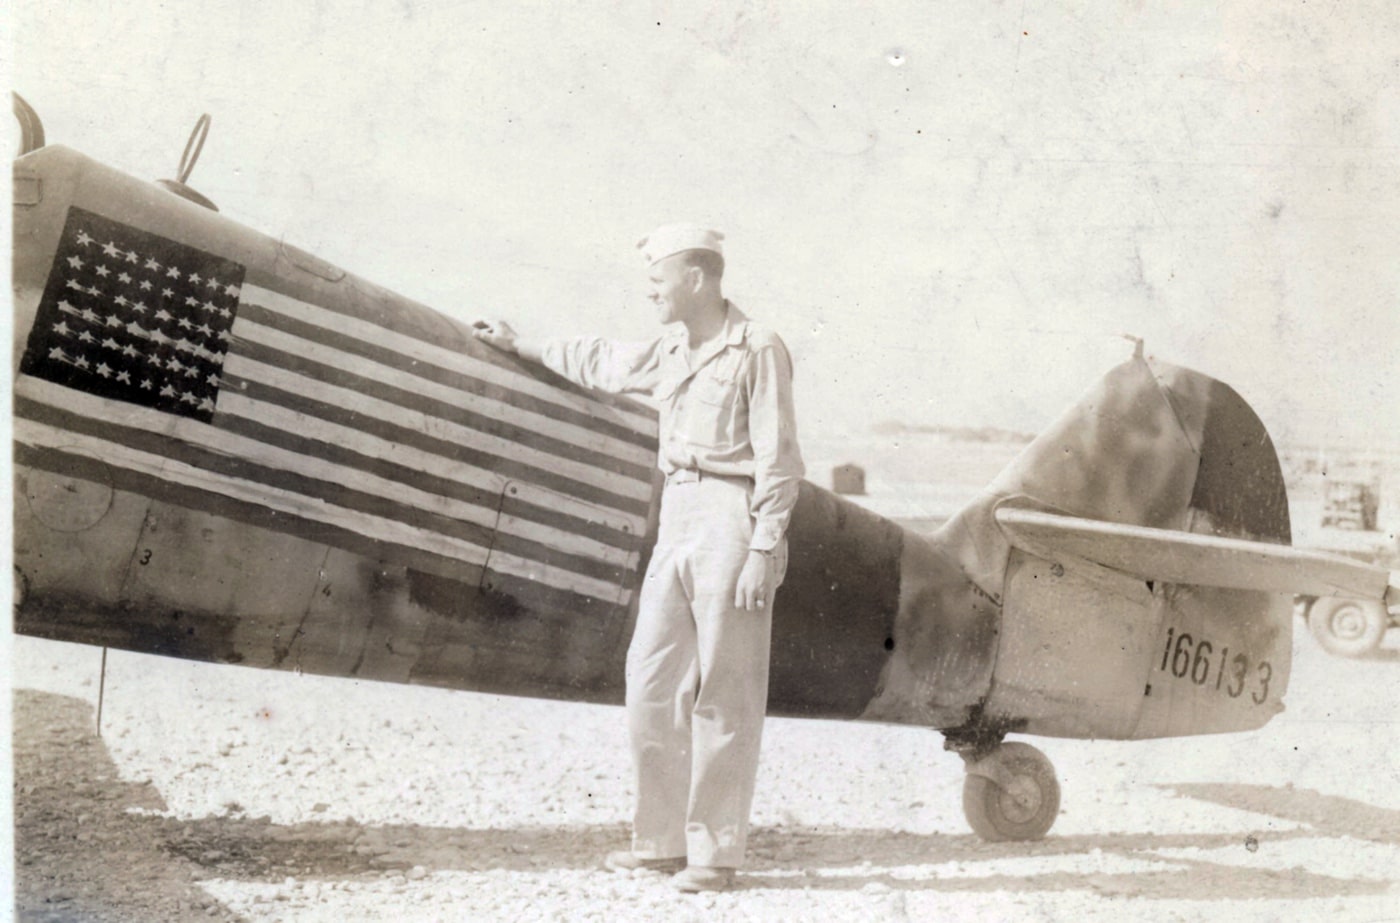 This photo shows the markings on Cantacuzino’s Messerschmitt. It has tail number 166133. The Bf 109 was a tail dragger like most of the fighters in the second world war.